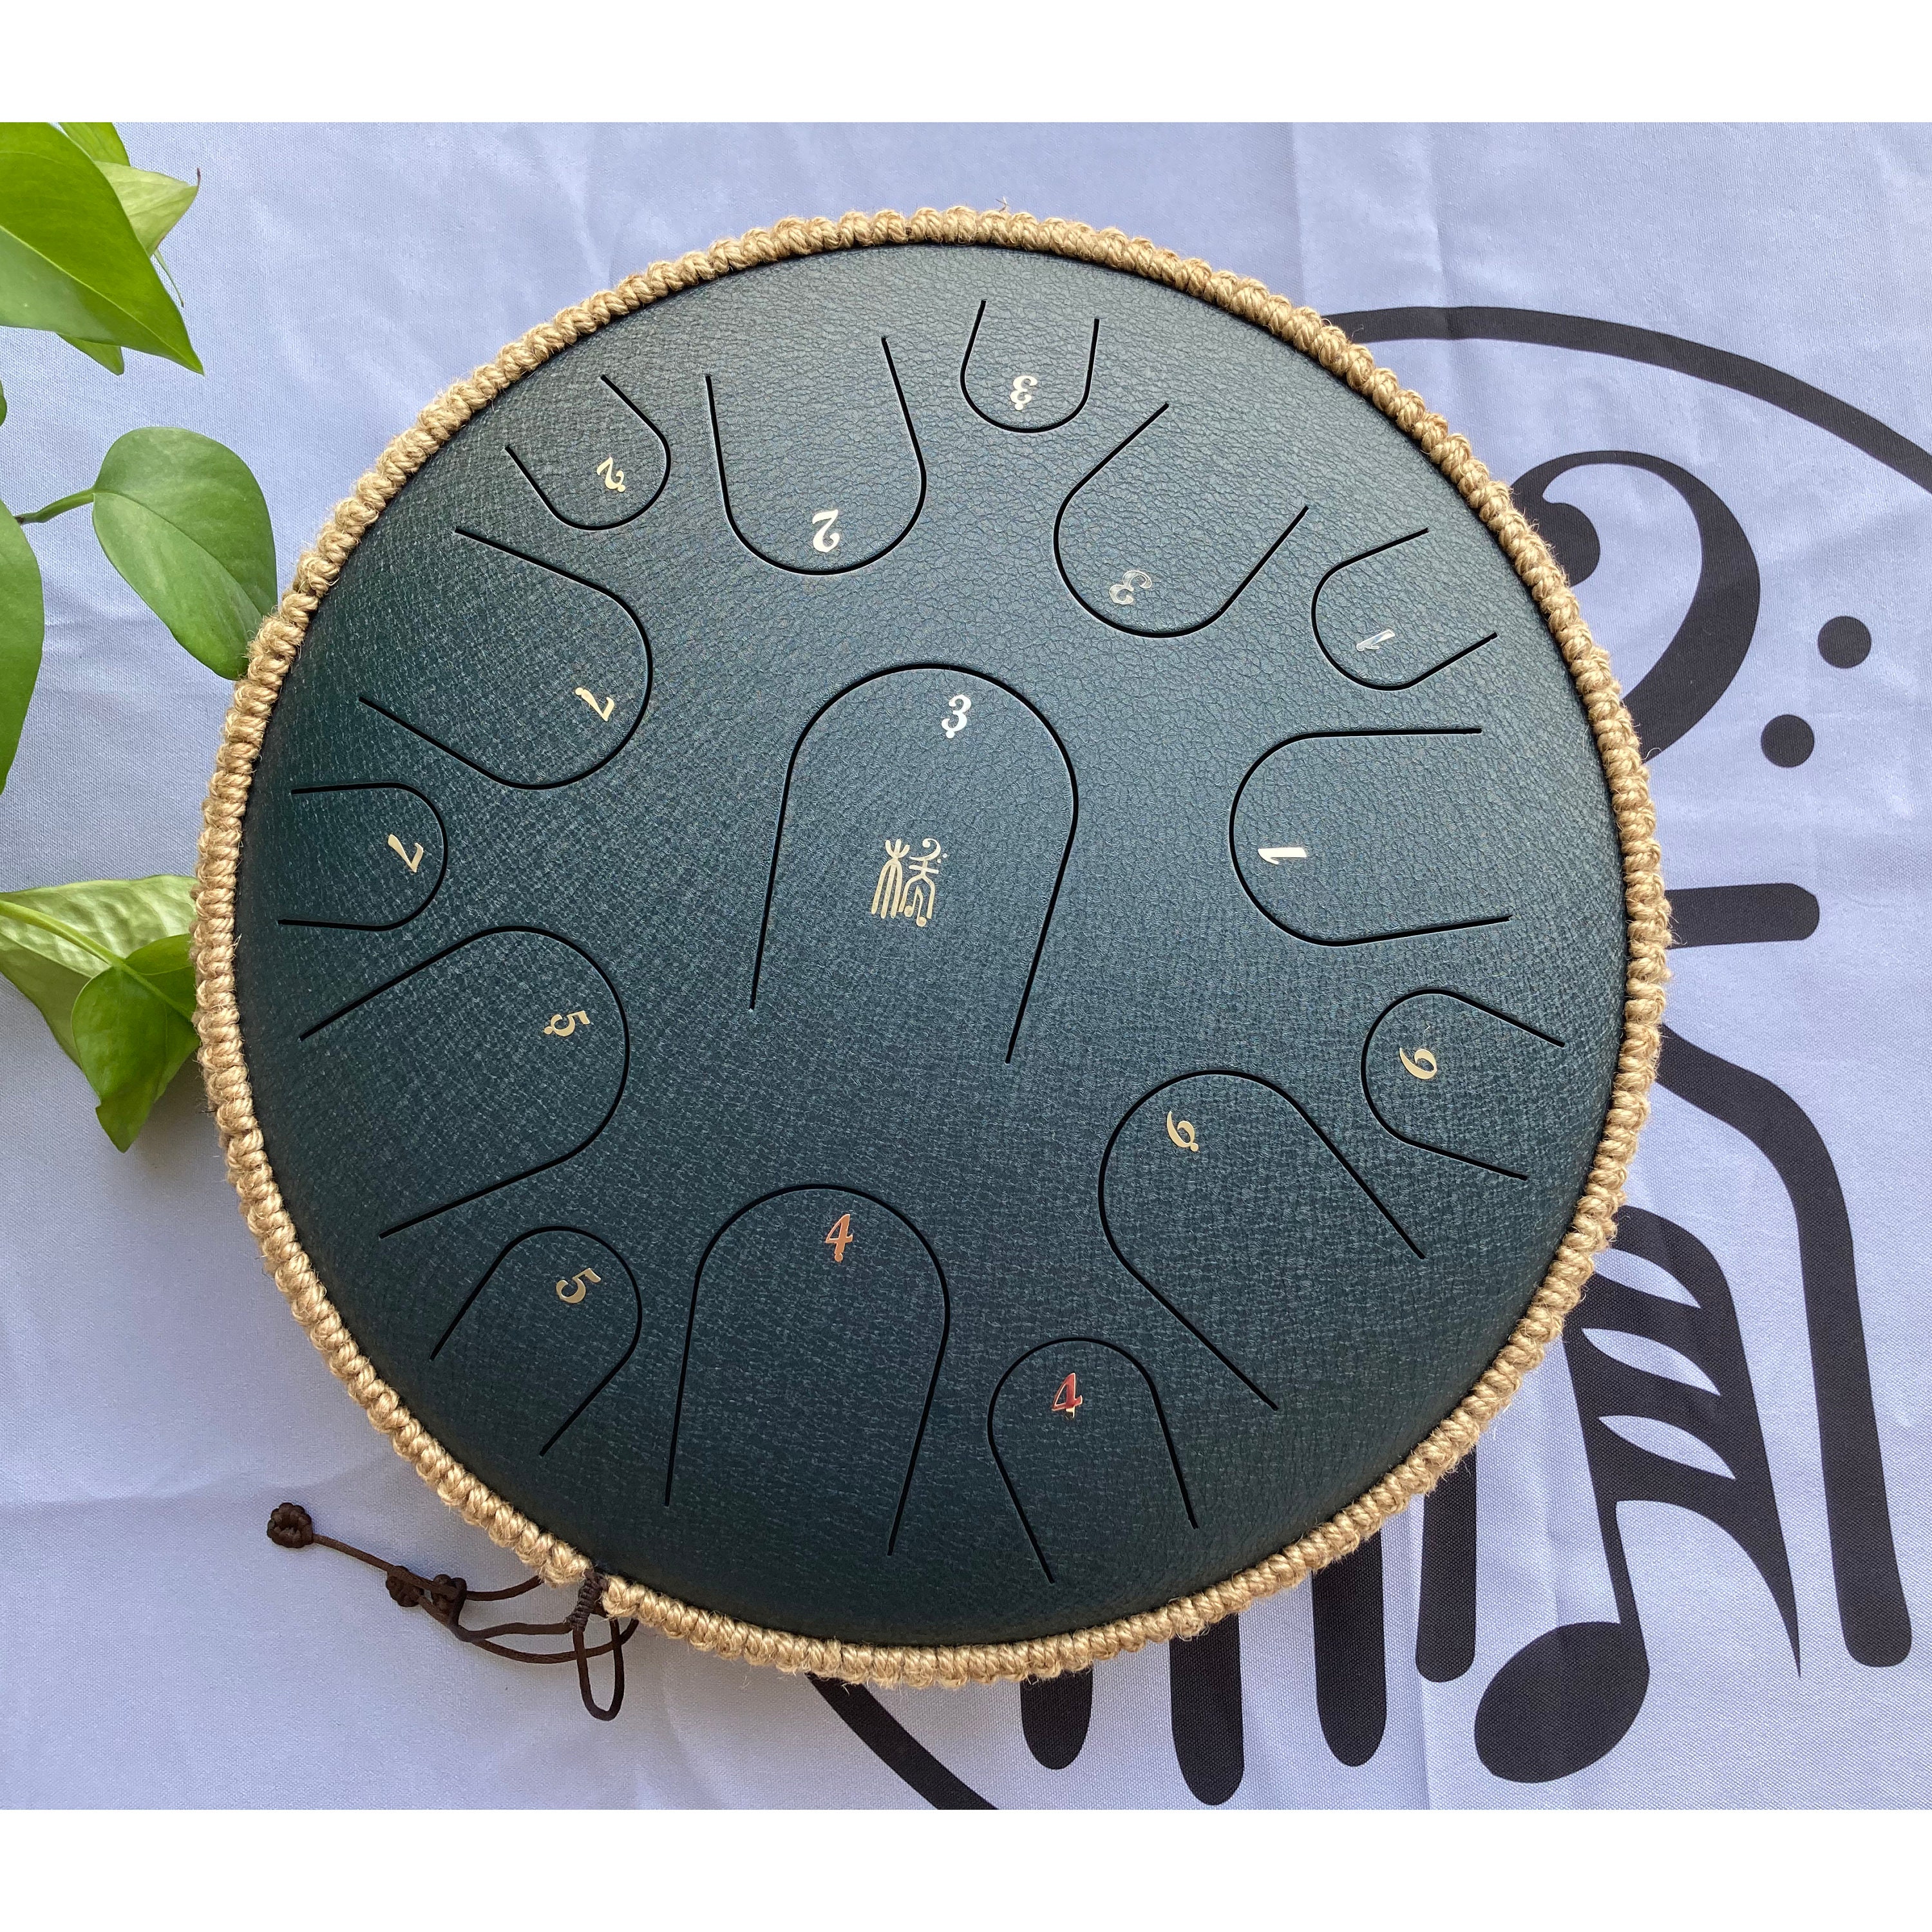 Tongue Drum, Steel Tongue Drum 11 Notes 6 Inch, Professional Steel